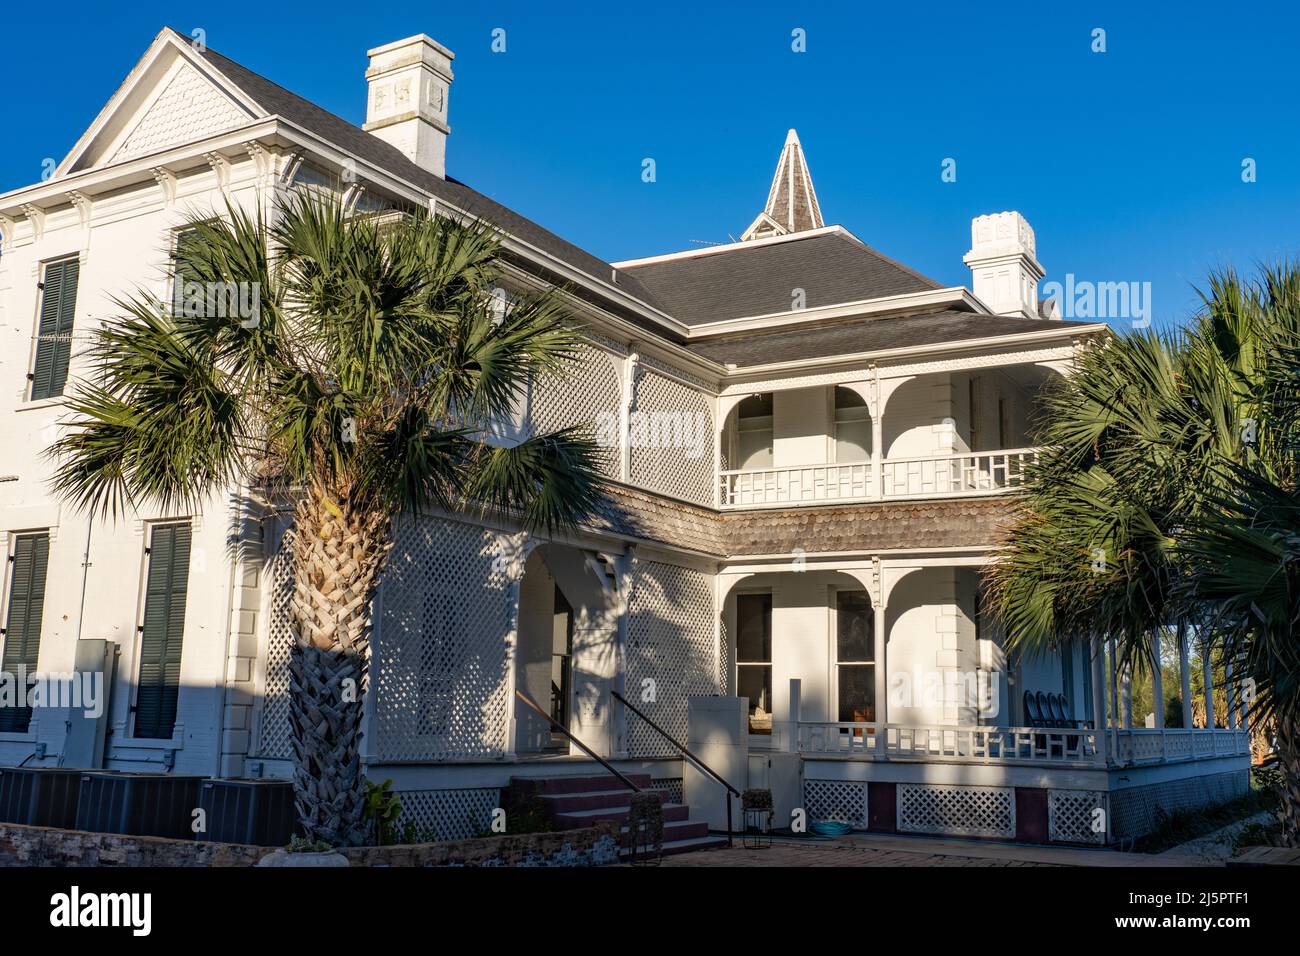 The Rabb Mansion, plantation house for the Rabb Plantation and now the visitor center for Sabal Palm Sanctuary, Brownsville, Texas. Stock Photo